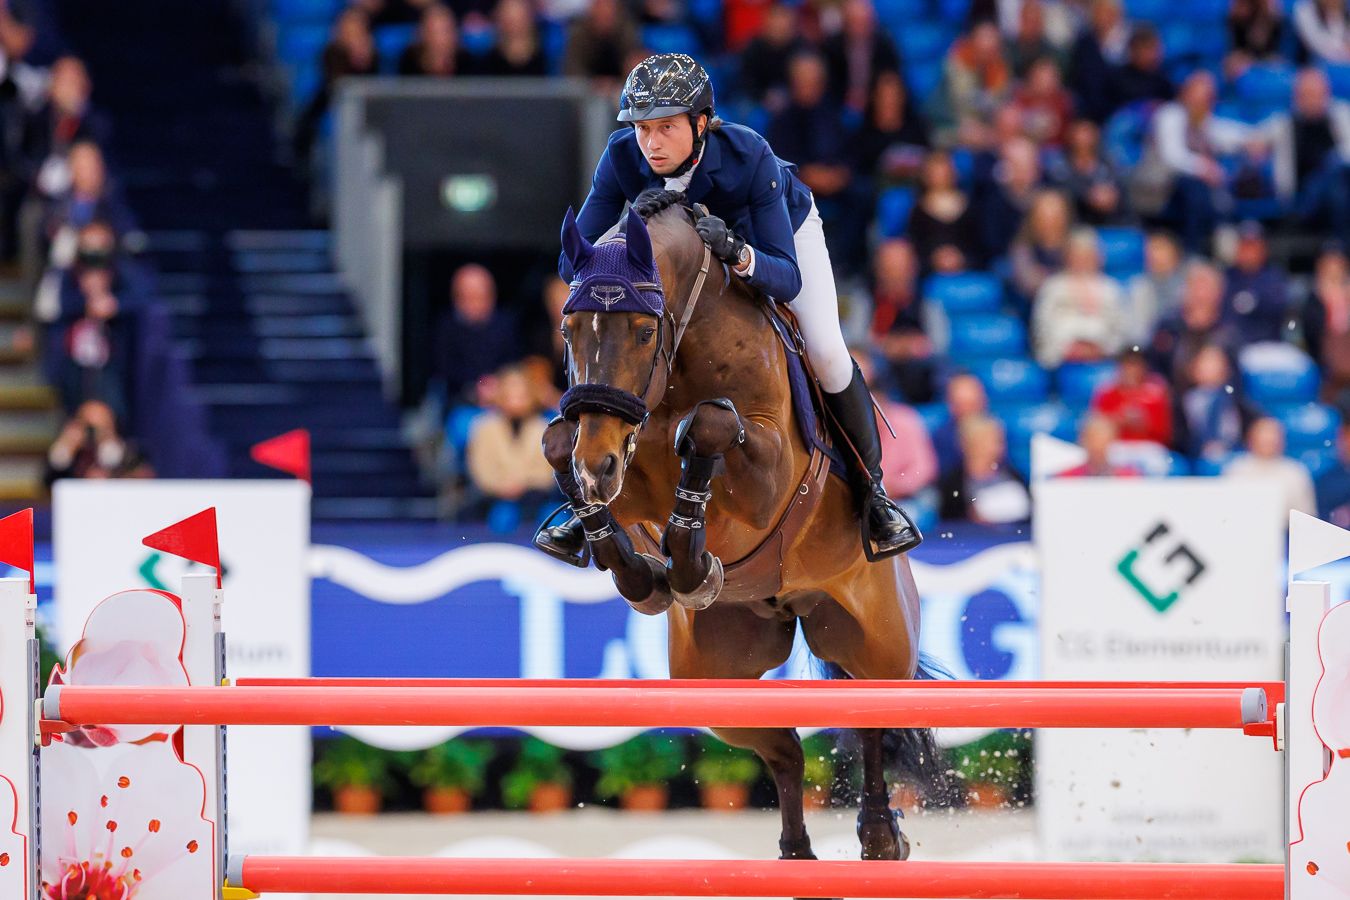 Martin Fuchs claims first FEI World Cup finals title after thrilling Finals